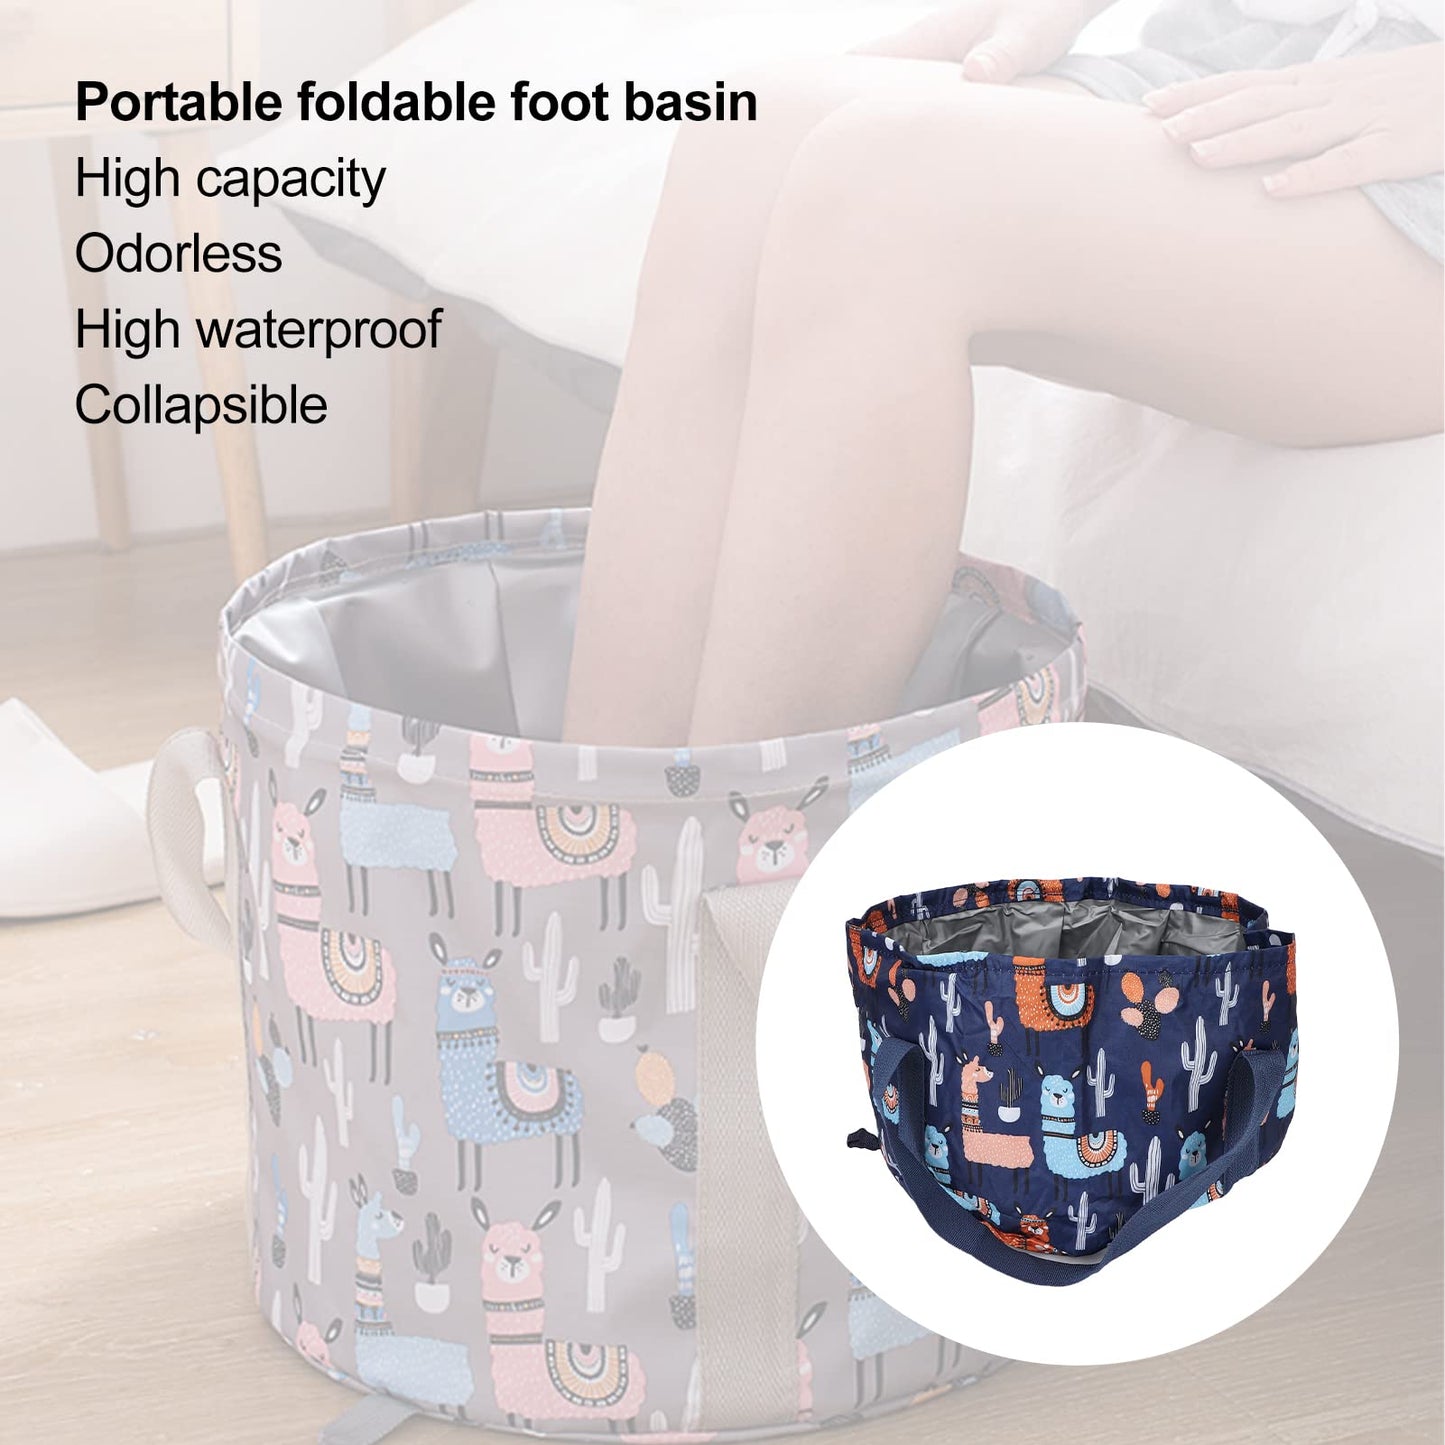 Collapsible Foot Basin 21L Portable Travel Foot Bath Tub Bag with Handles Folding Foot Bath Basin for Soaking Feet Pedicure Foot Spa Bucket Outdoor Camping Water Container(Navy)